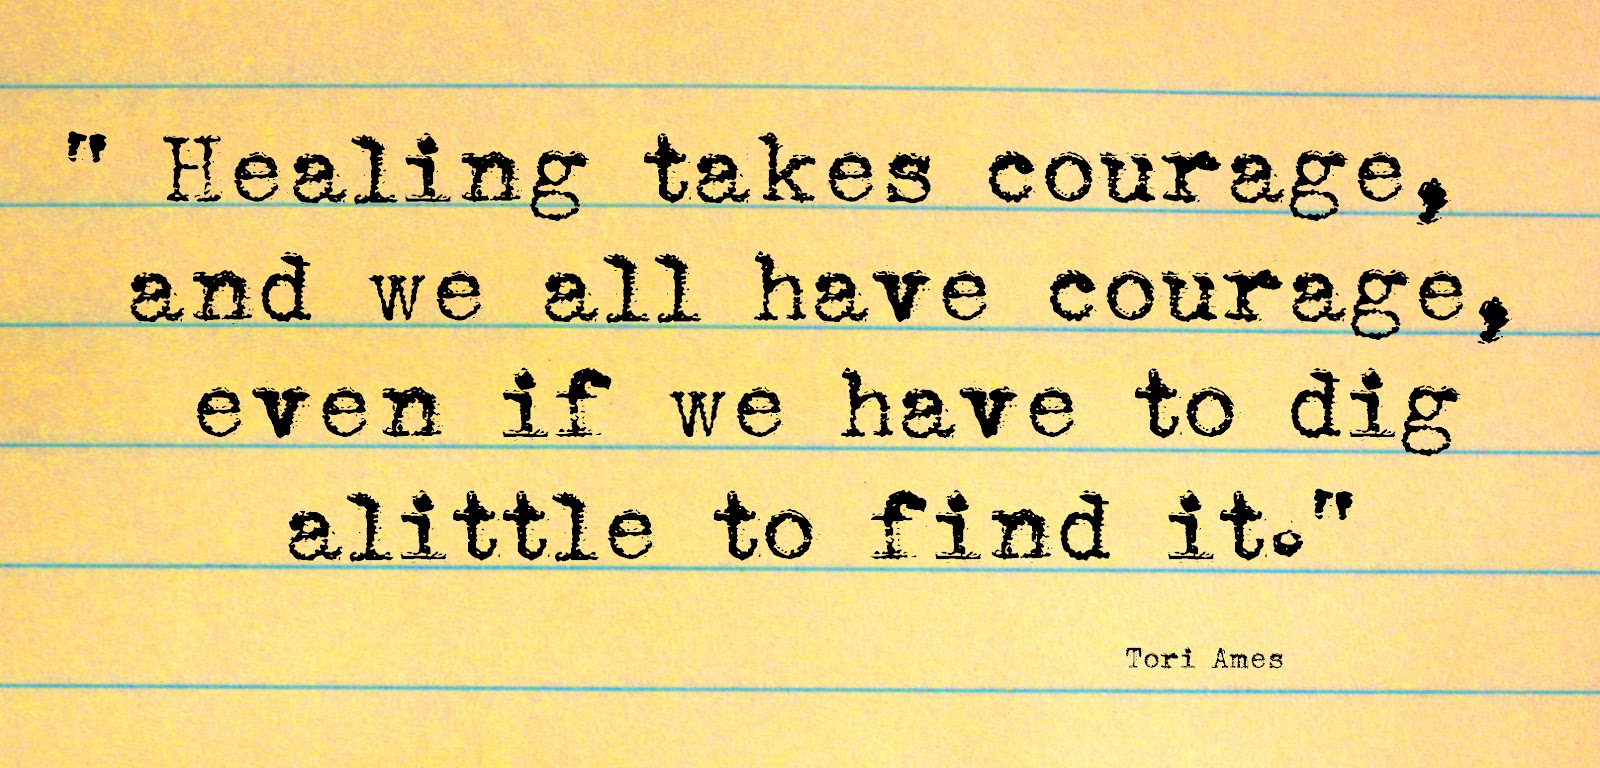 Healing takes courage, and we all have courage, even if we have to dig a little to find it. Tori Amos